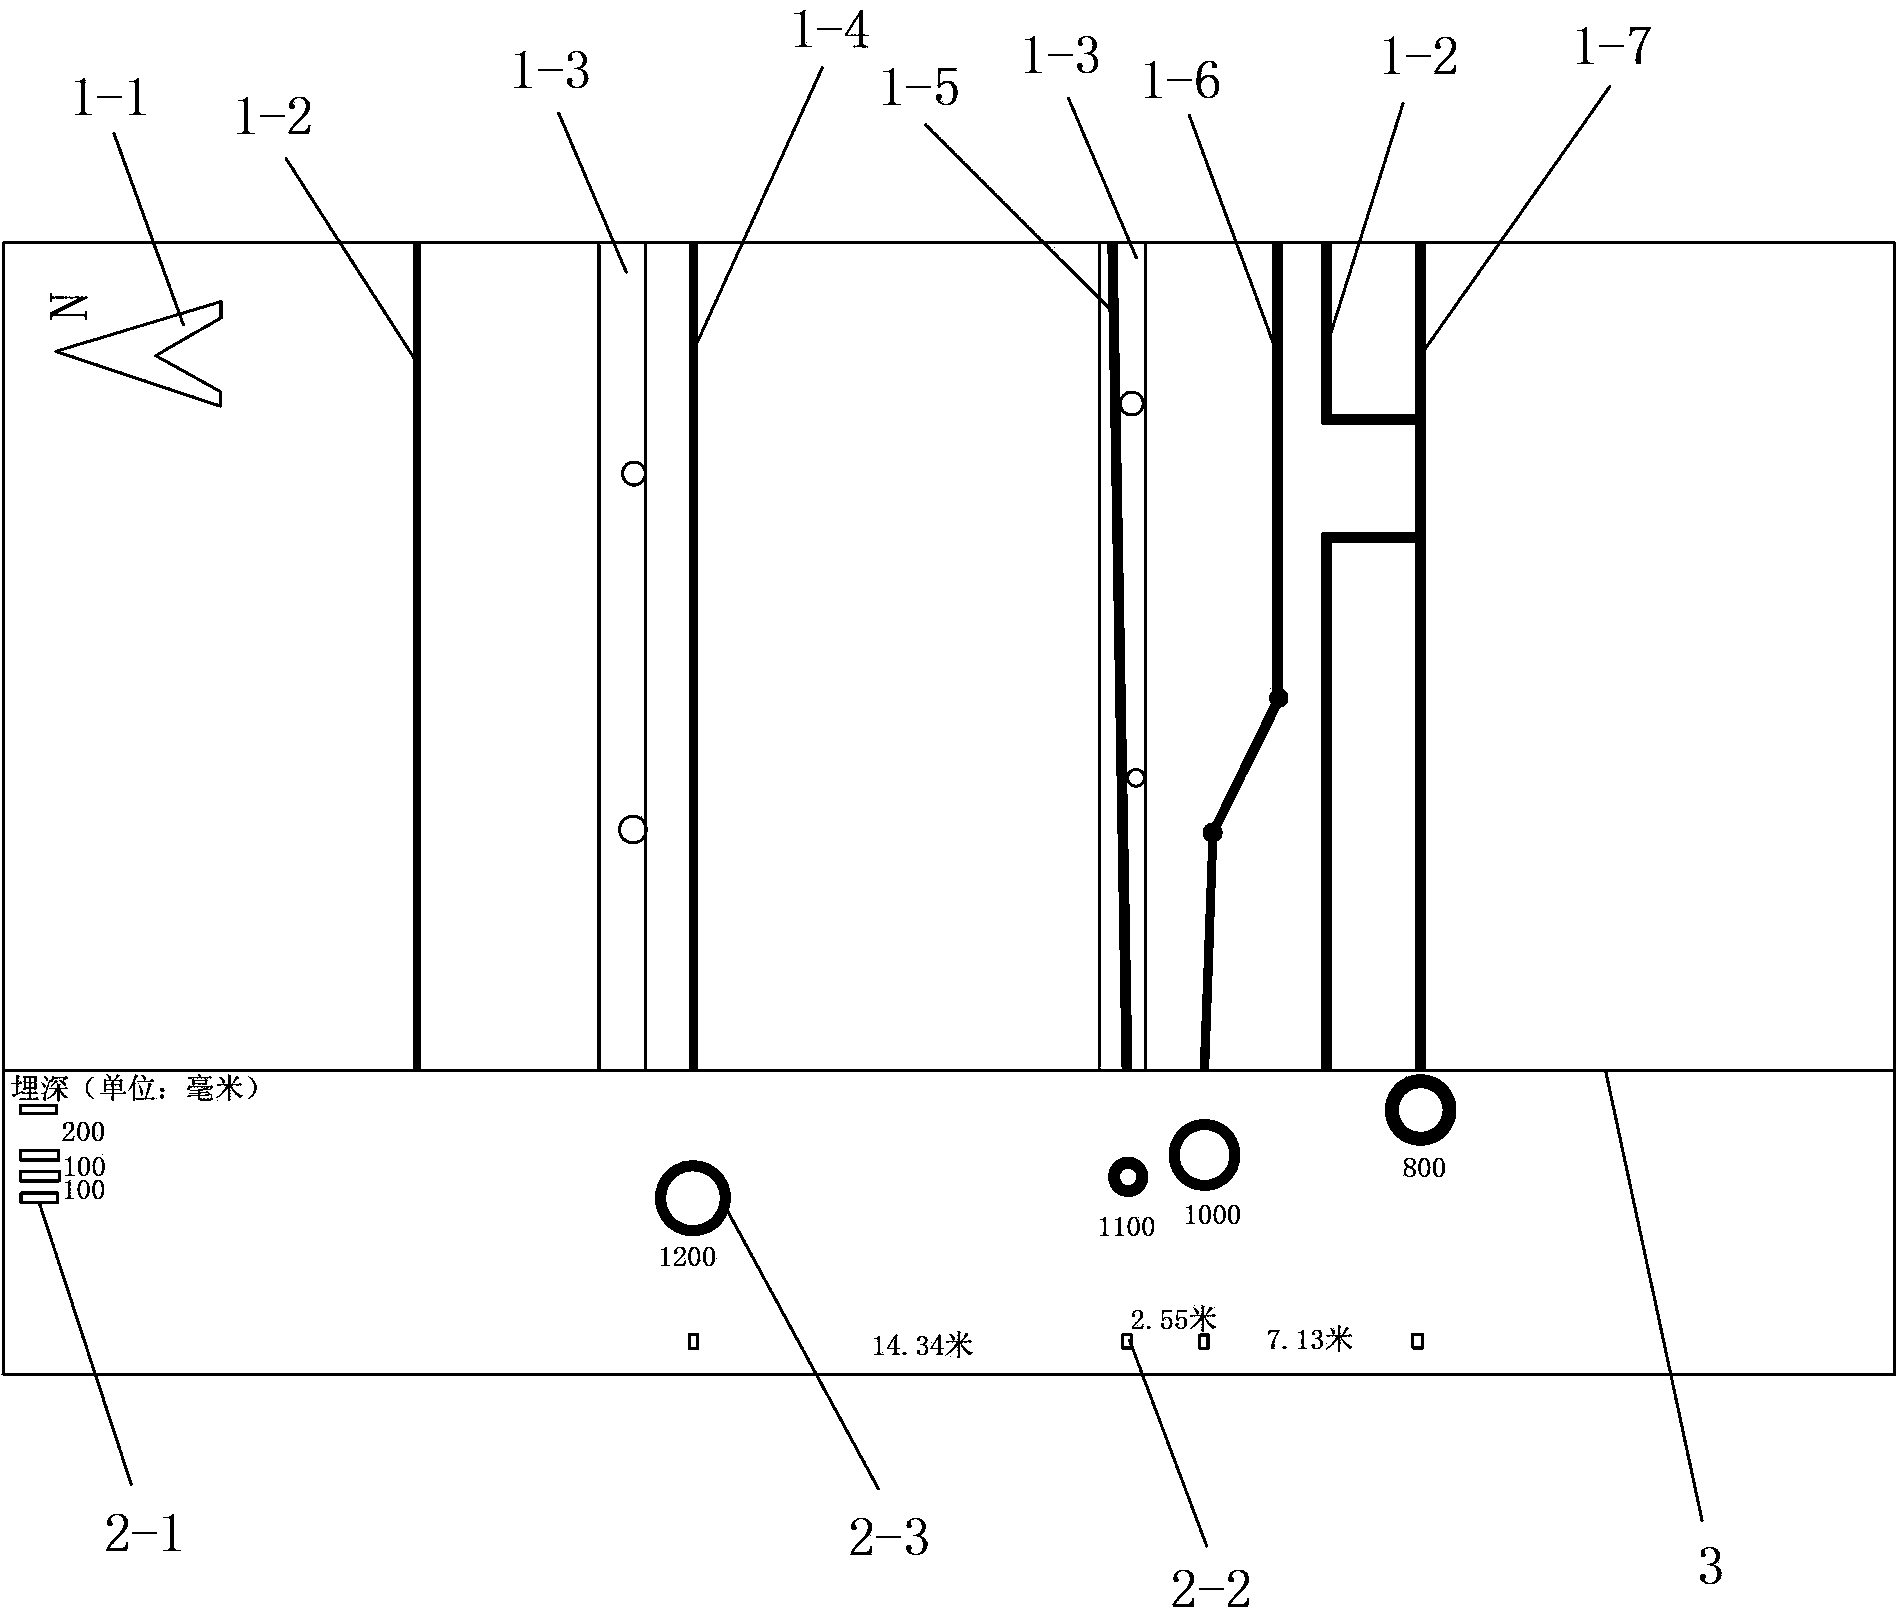 Underground pipeline plane and cross section integration showing method